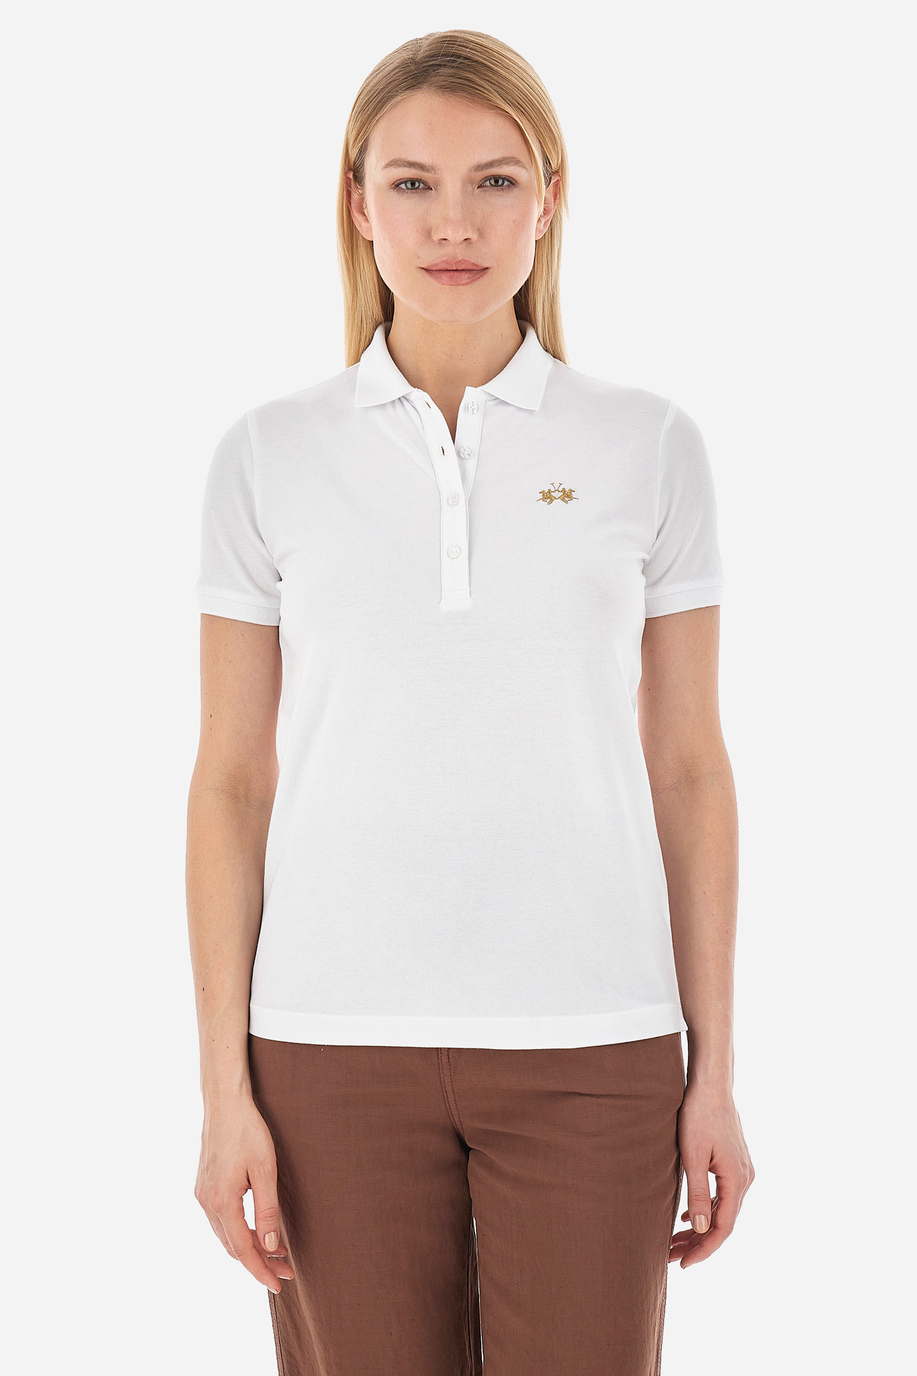 Women's polo shirt in a regular fit - Amalia - Monogrammed gifts for her | La Martina - Official Online Shop